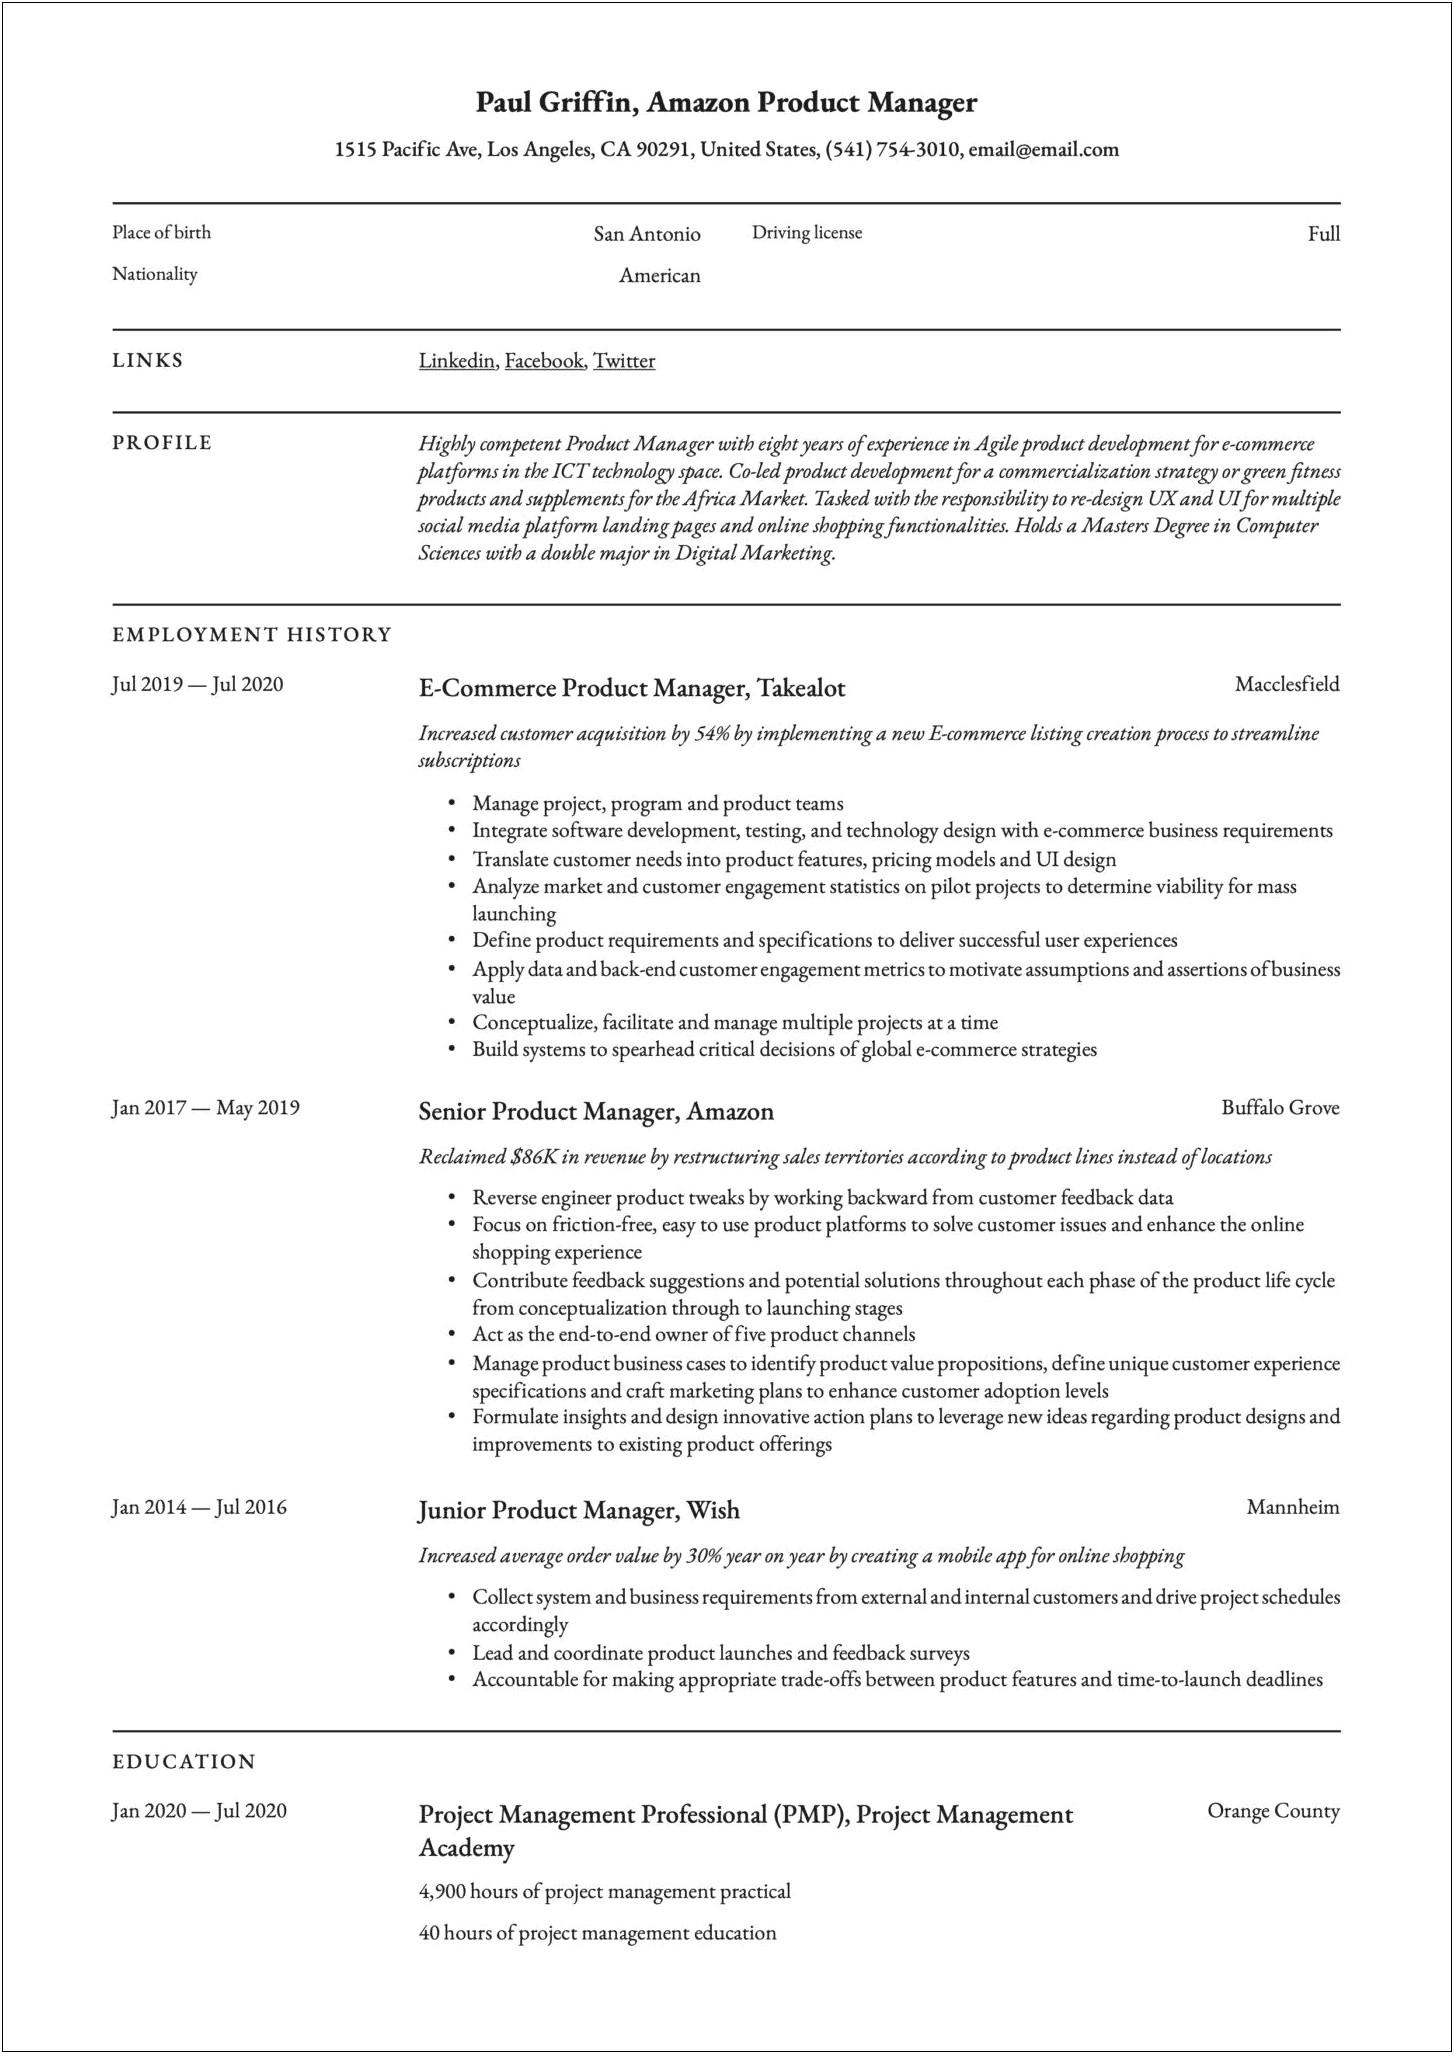 Agile Product Owner Resume Examples